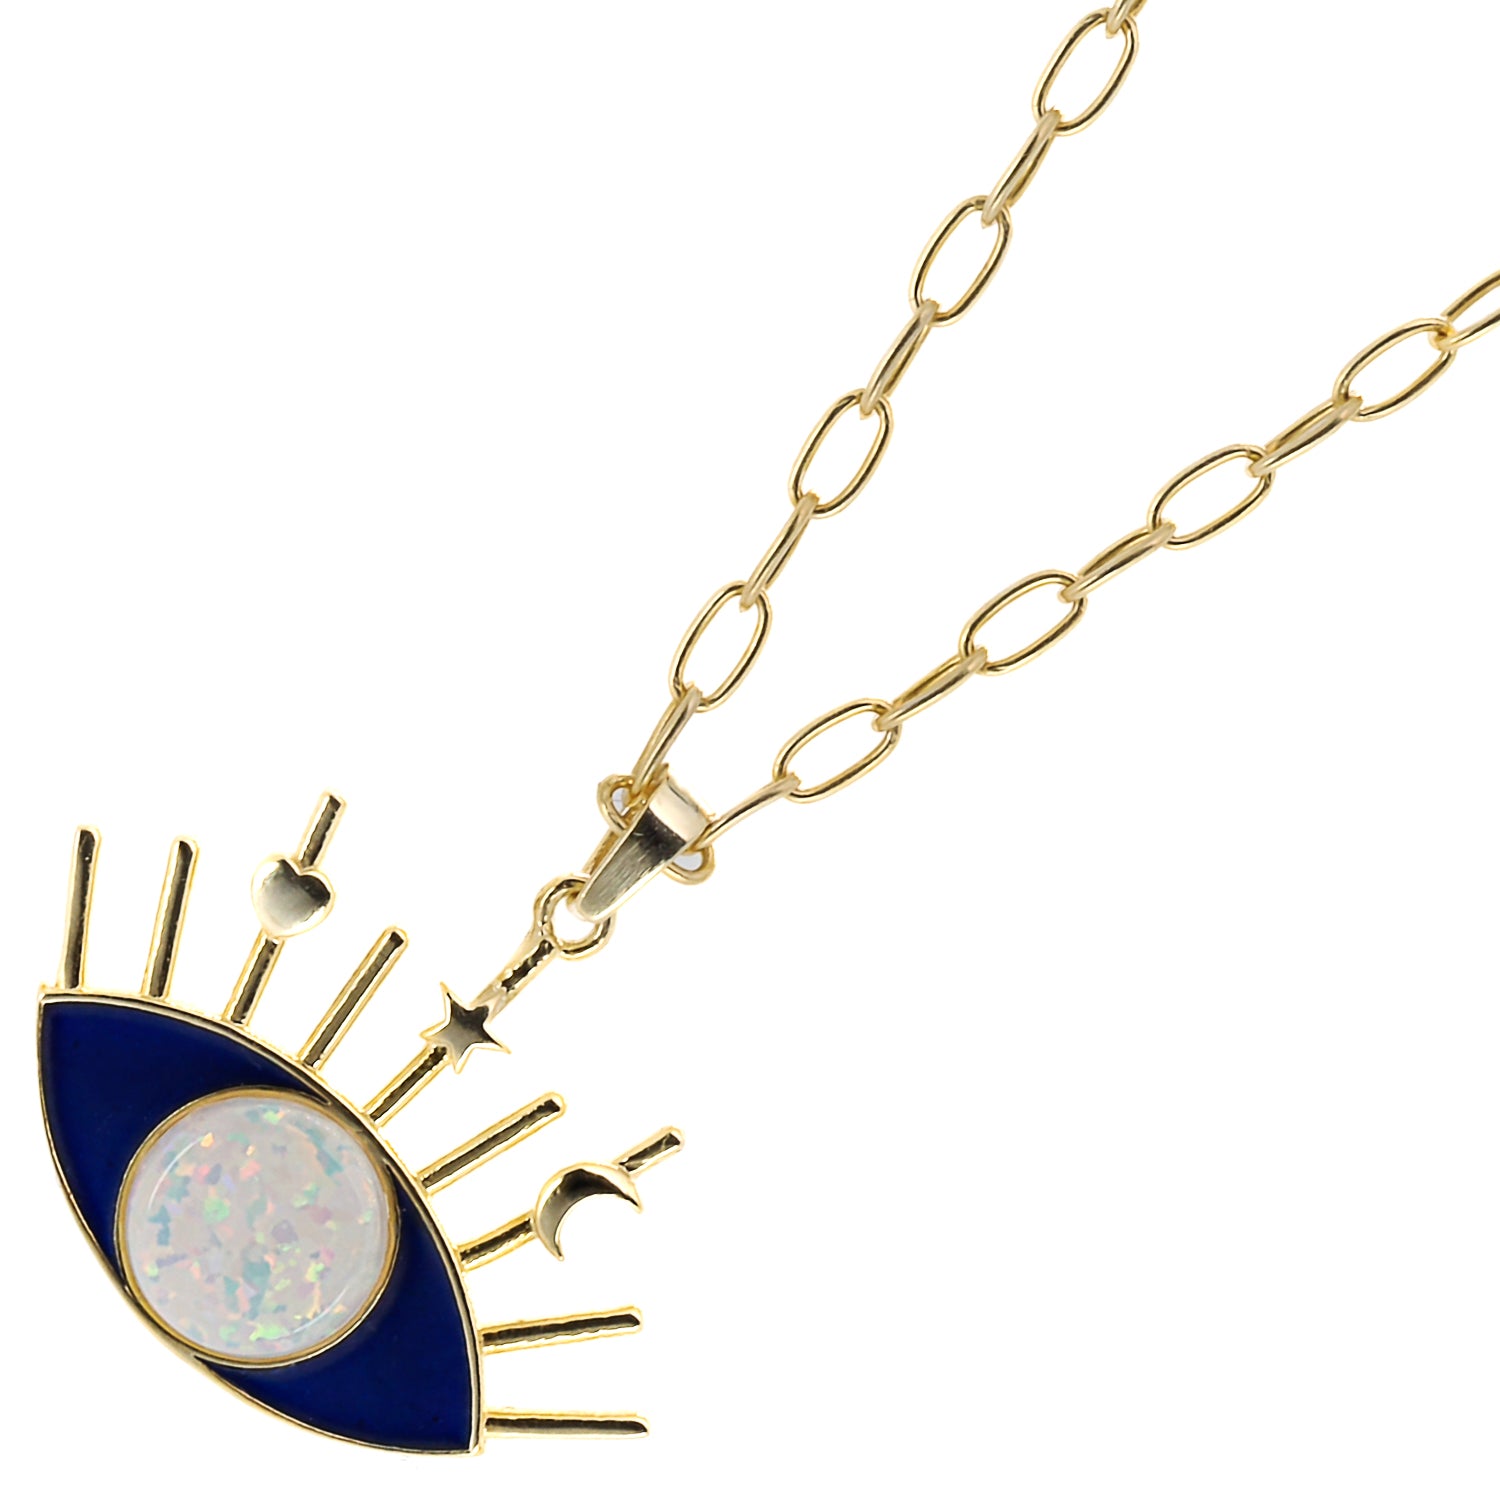 The Opal Blue Evil Eye Necklace, a symbol of protection and style.